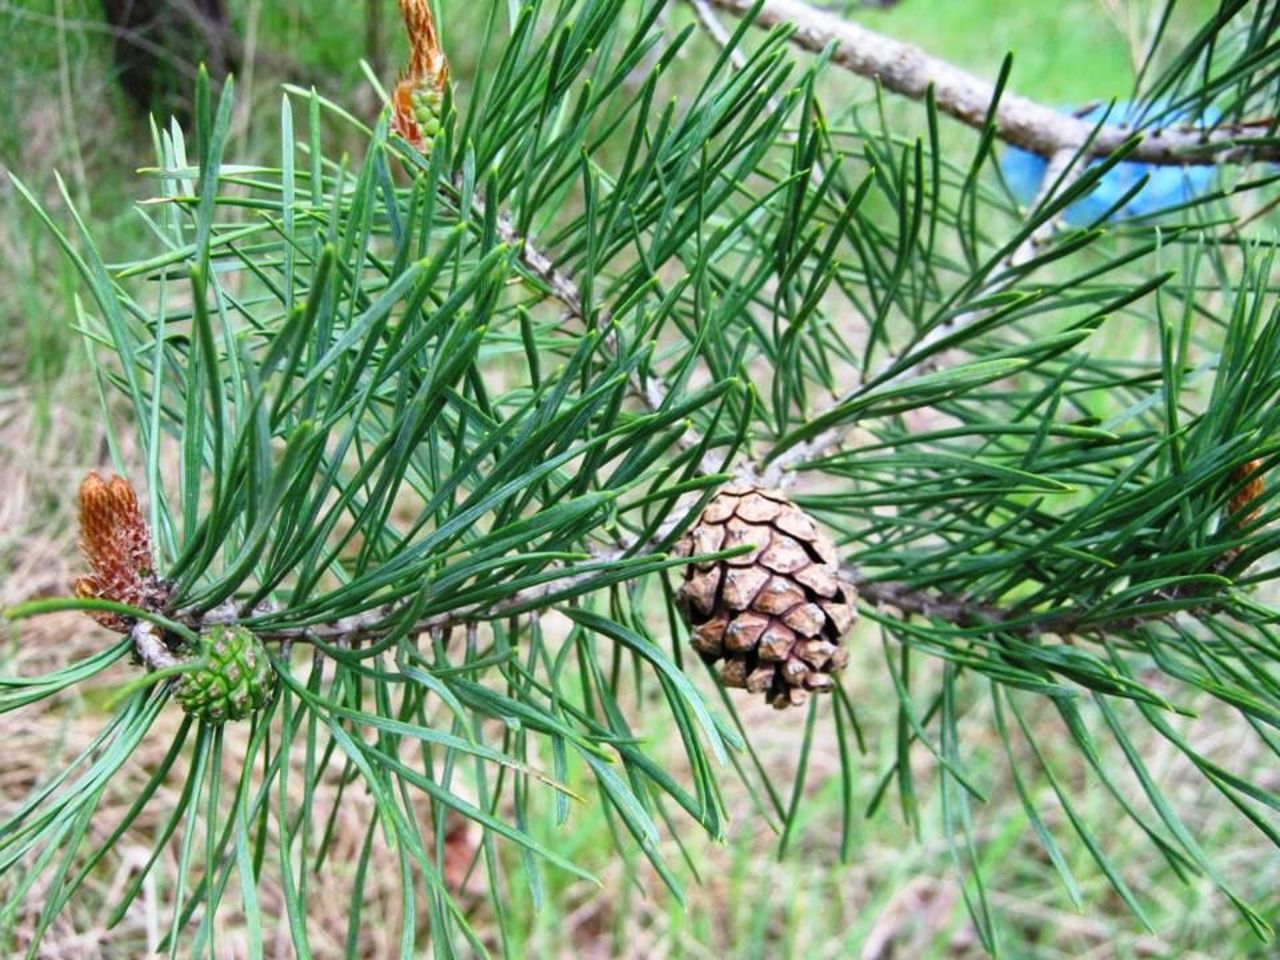 New and old Scots pine cone side by side